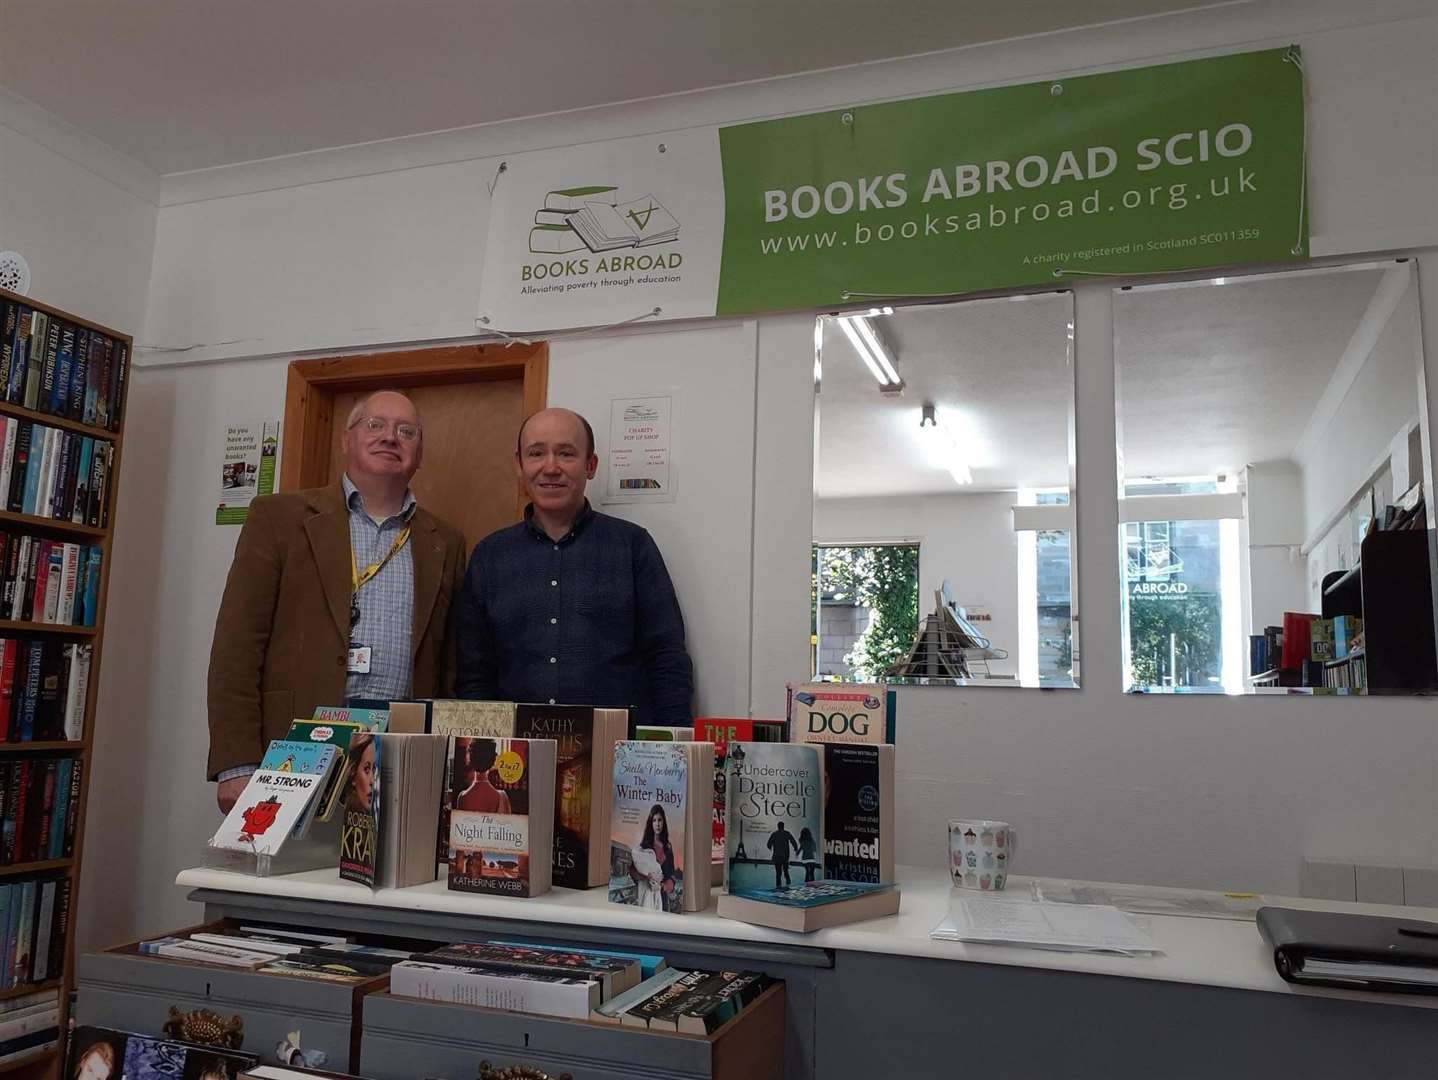 Books Abroad trustee Gary McGregor (right) and councillor Glen Reynolds at the charity's new base in Banff.